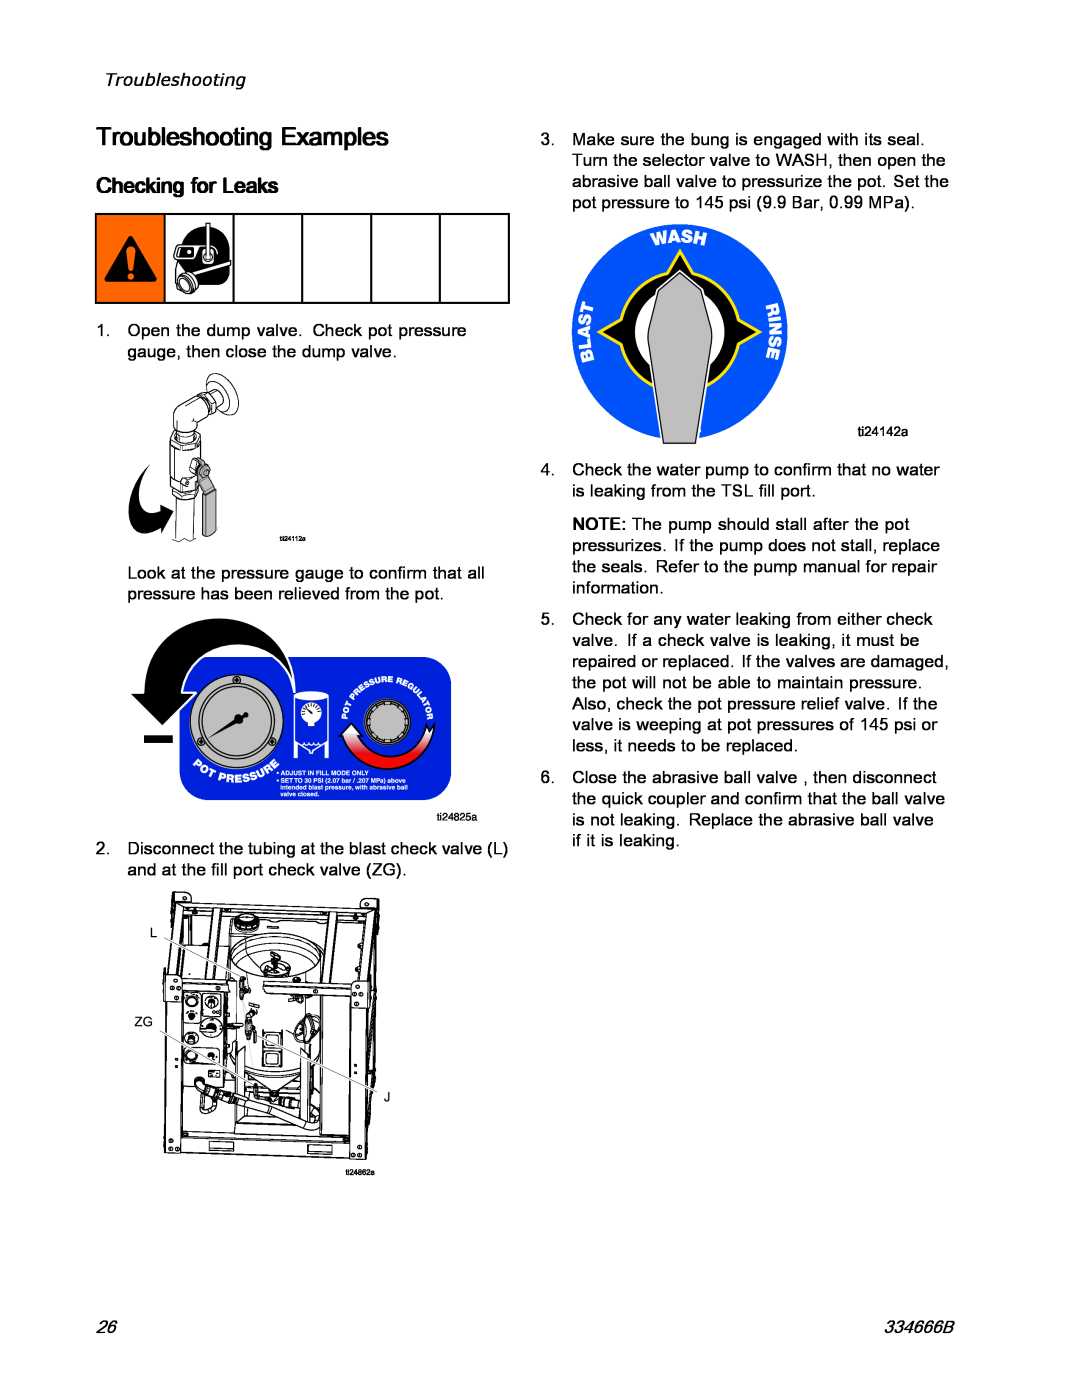 Graco ti25442a manual Troubleshooting Examples, Checking for Leaks, 334666B 